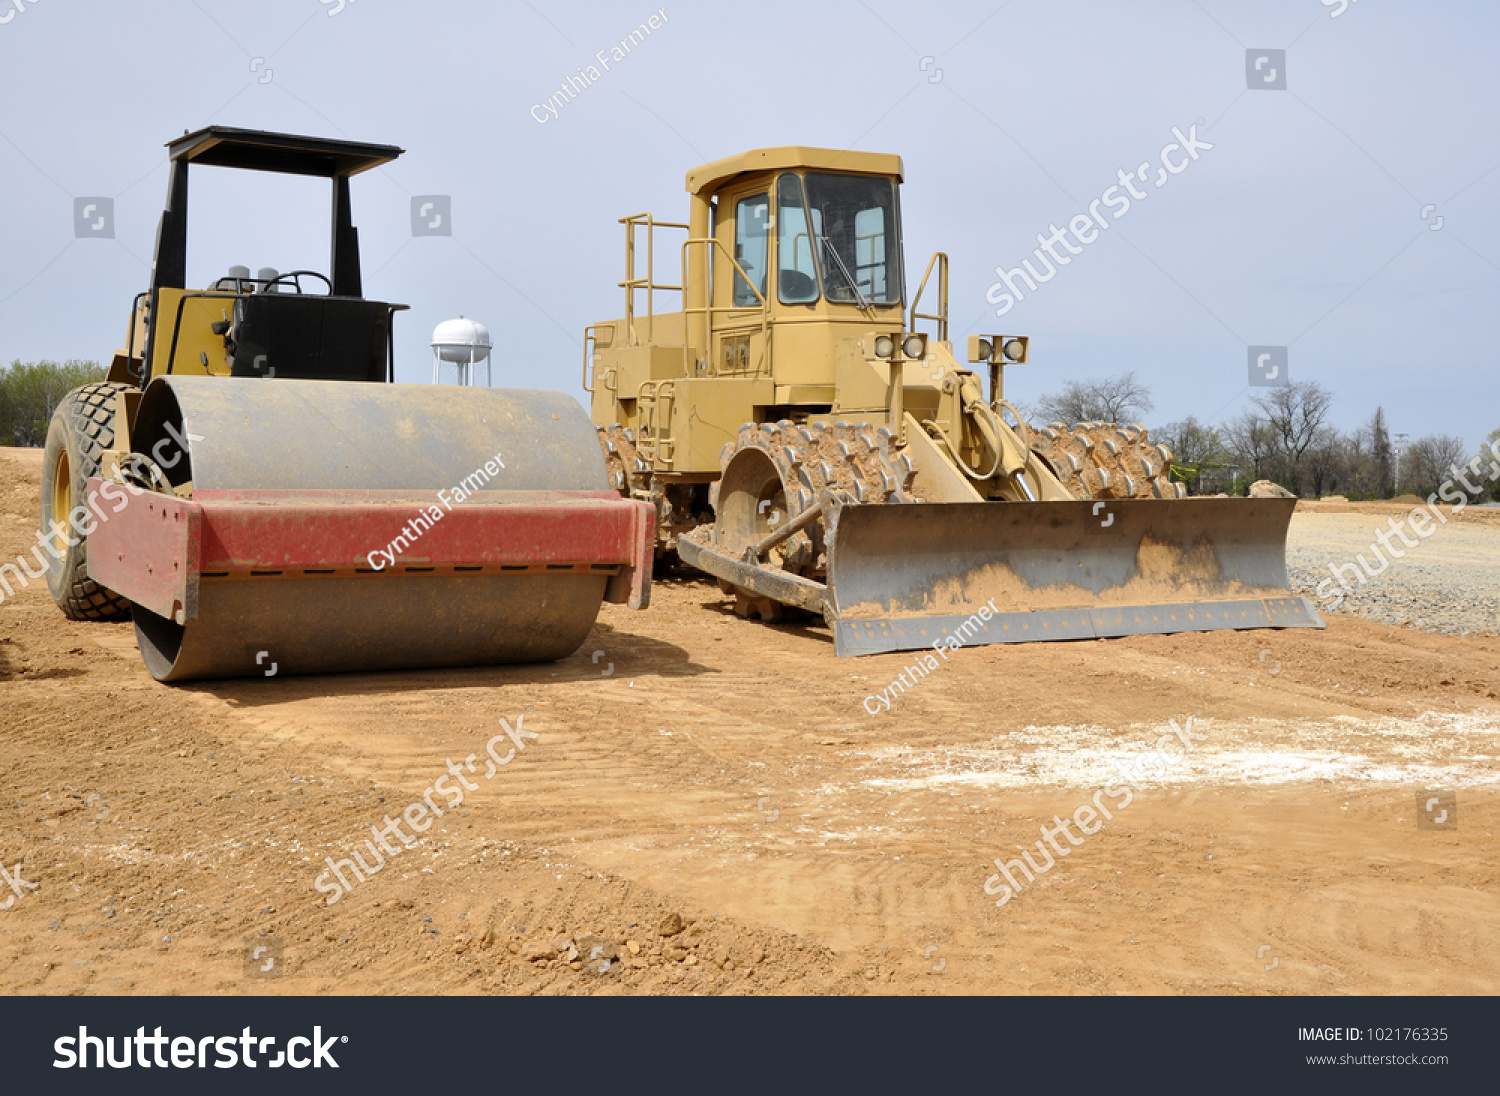 What are some different types of excavation equipment?